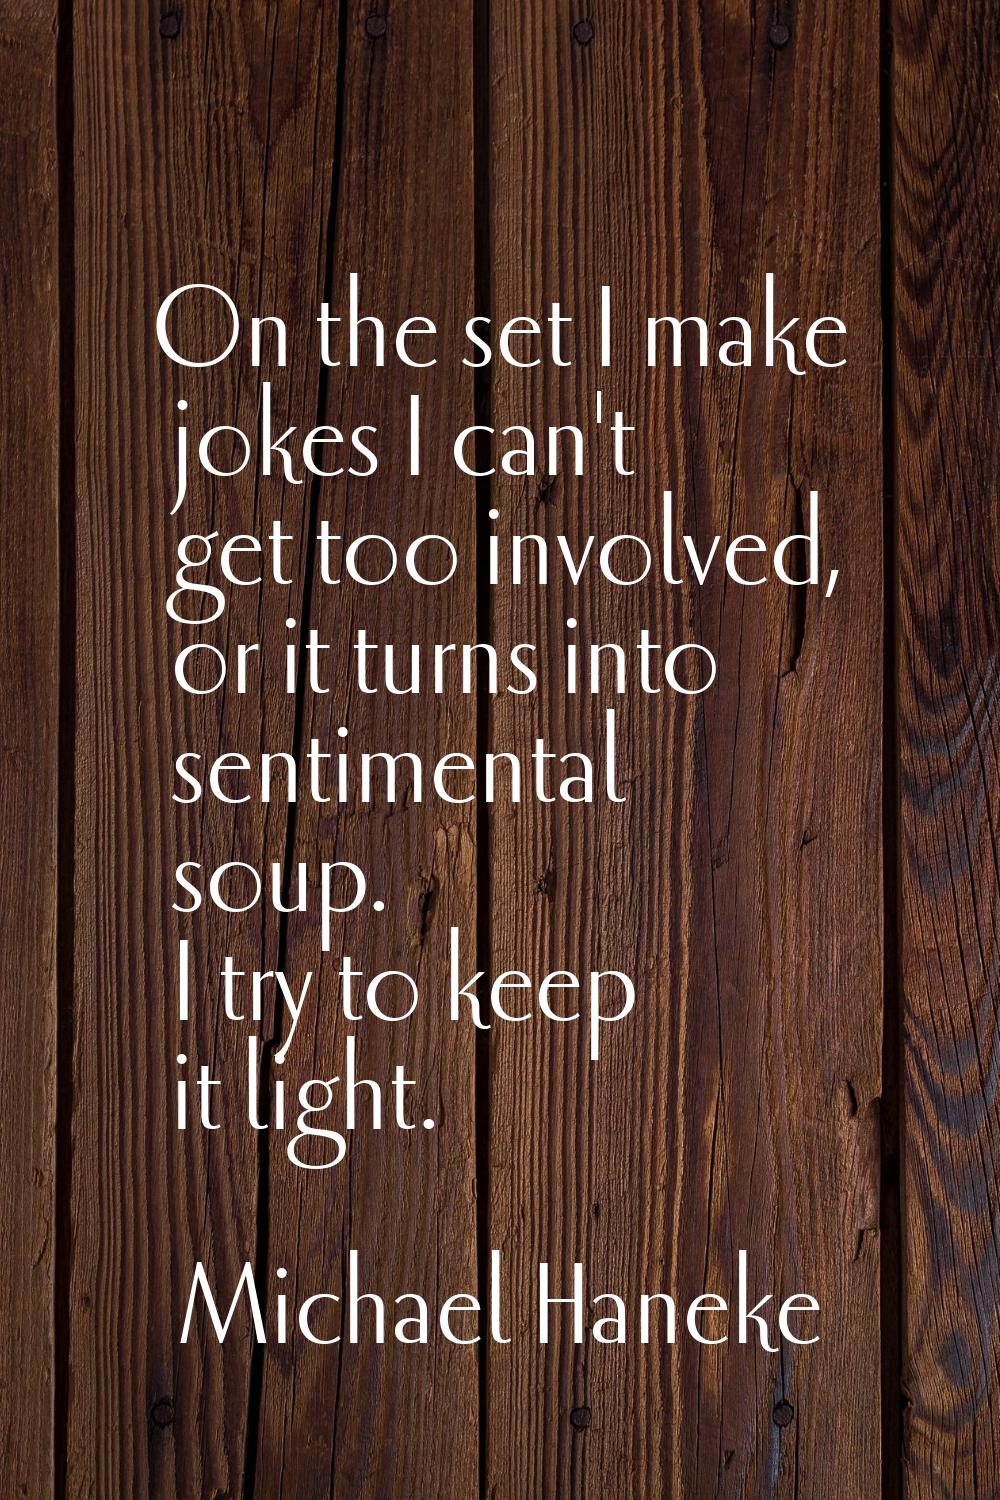 On the set I make jokes I can't get too involved, or it turns into sentimental soup. I try to keep 